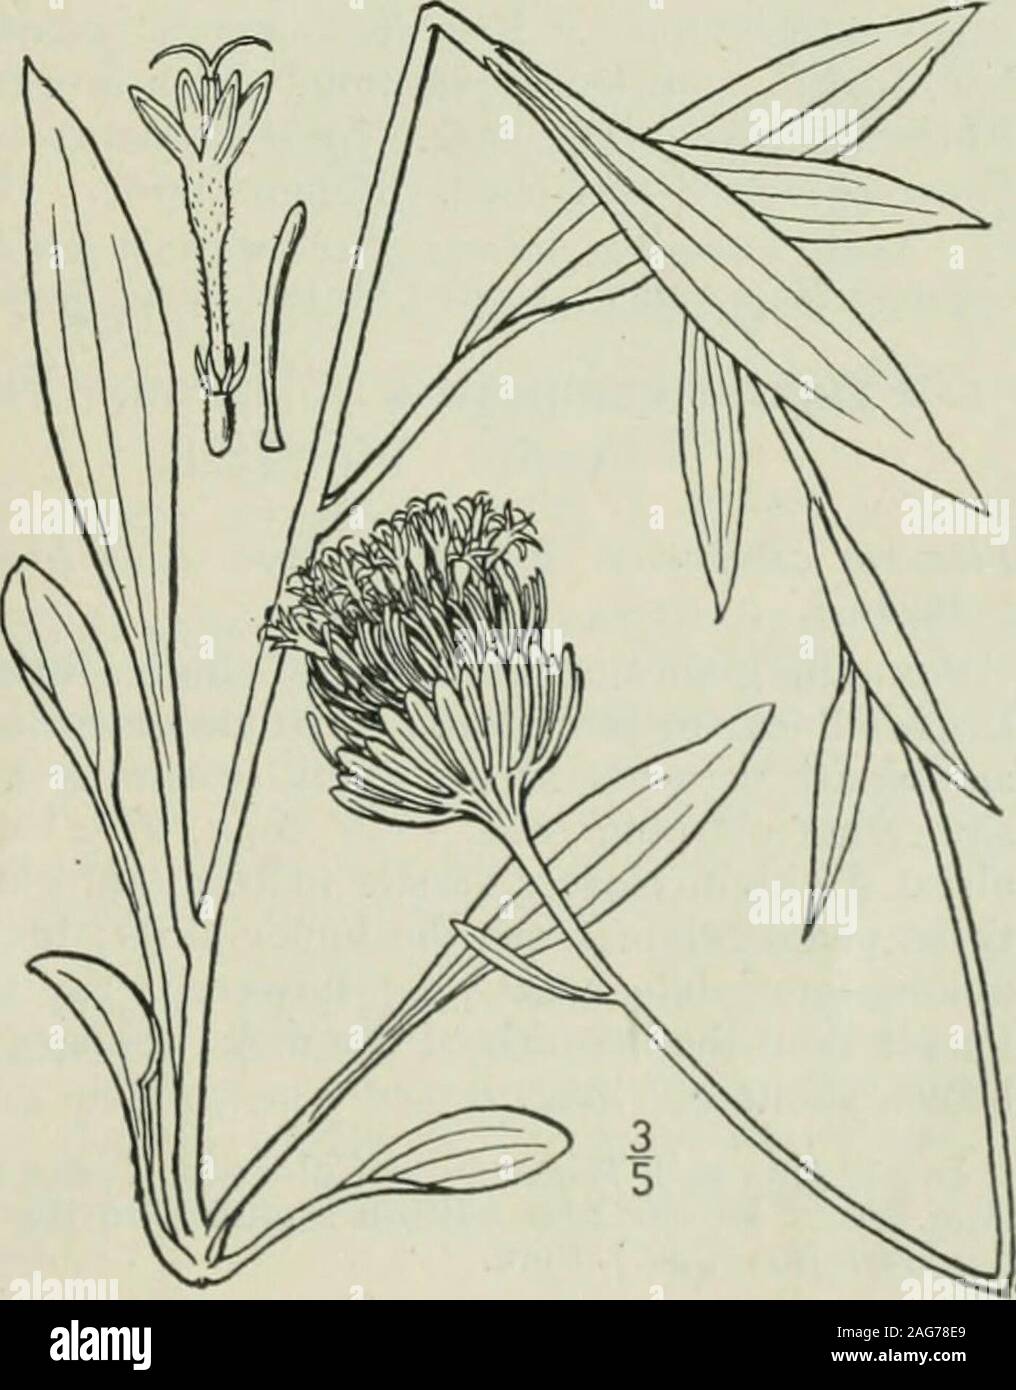 . An illustrated flora of the northern United States, Canada and the British possessions : from Newfoundland to the parallel of the southern boundary of Virginia and from the Atlantic Ocean westward to the 102nd meridian. acutish; chaff of thereceptacle linear, or slightly dilated above; achenes vil-lous on the angles; scales of the pappus ovate, acutish,equalling or longer than the achene. Prairies and hills, Missouri and Kansas to Texas. May-June. 3. Marshallia grandiflora Beadle & Boynton. Large-flowered Marshallia. Fig. 4526. Marshallia grandiflora Beadle & Boynton, Bilt-more Bot.Stud. 1:7 Stock Photo